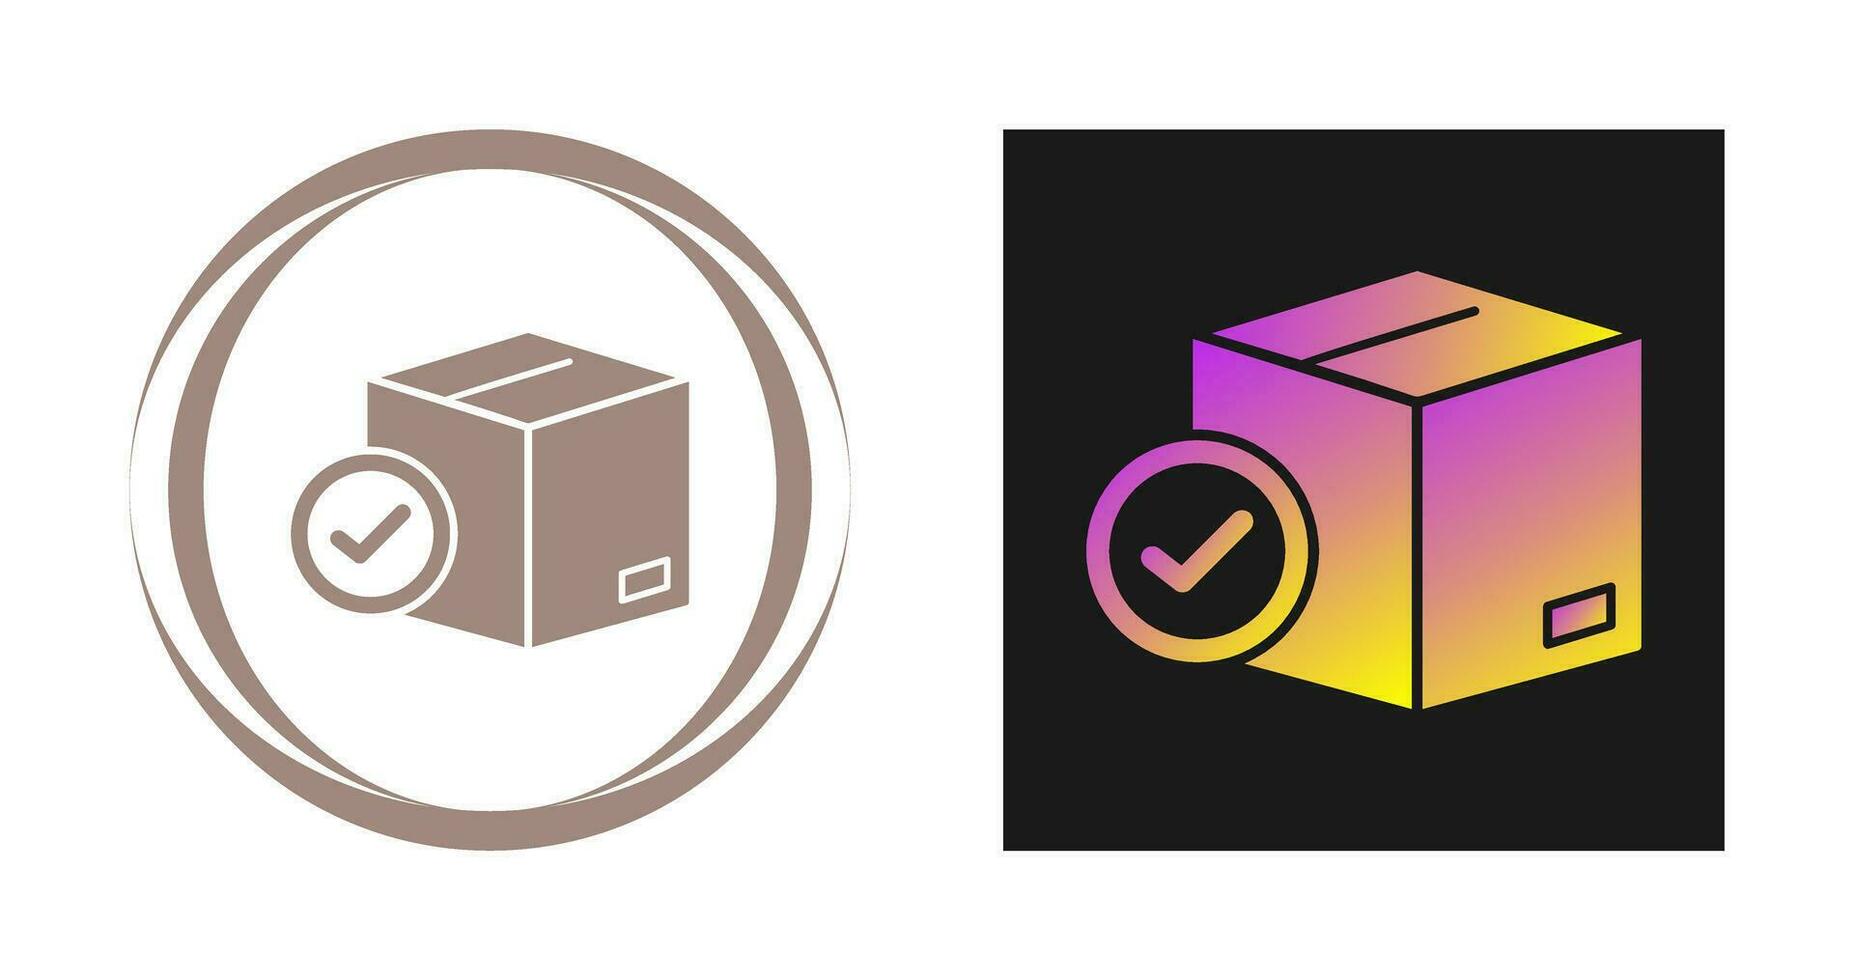 Package Delivered Vector Icon